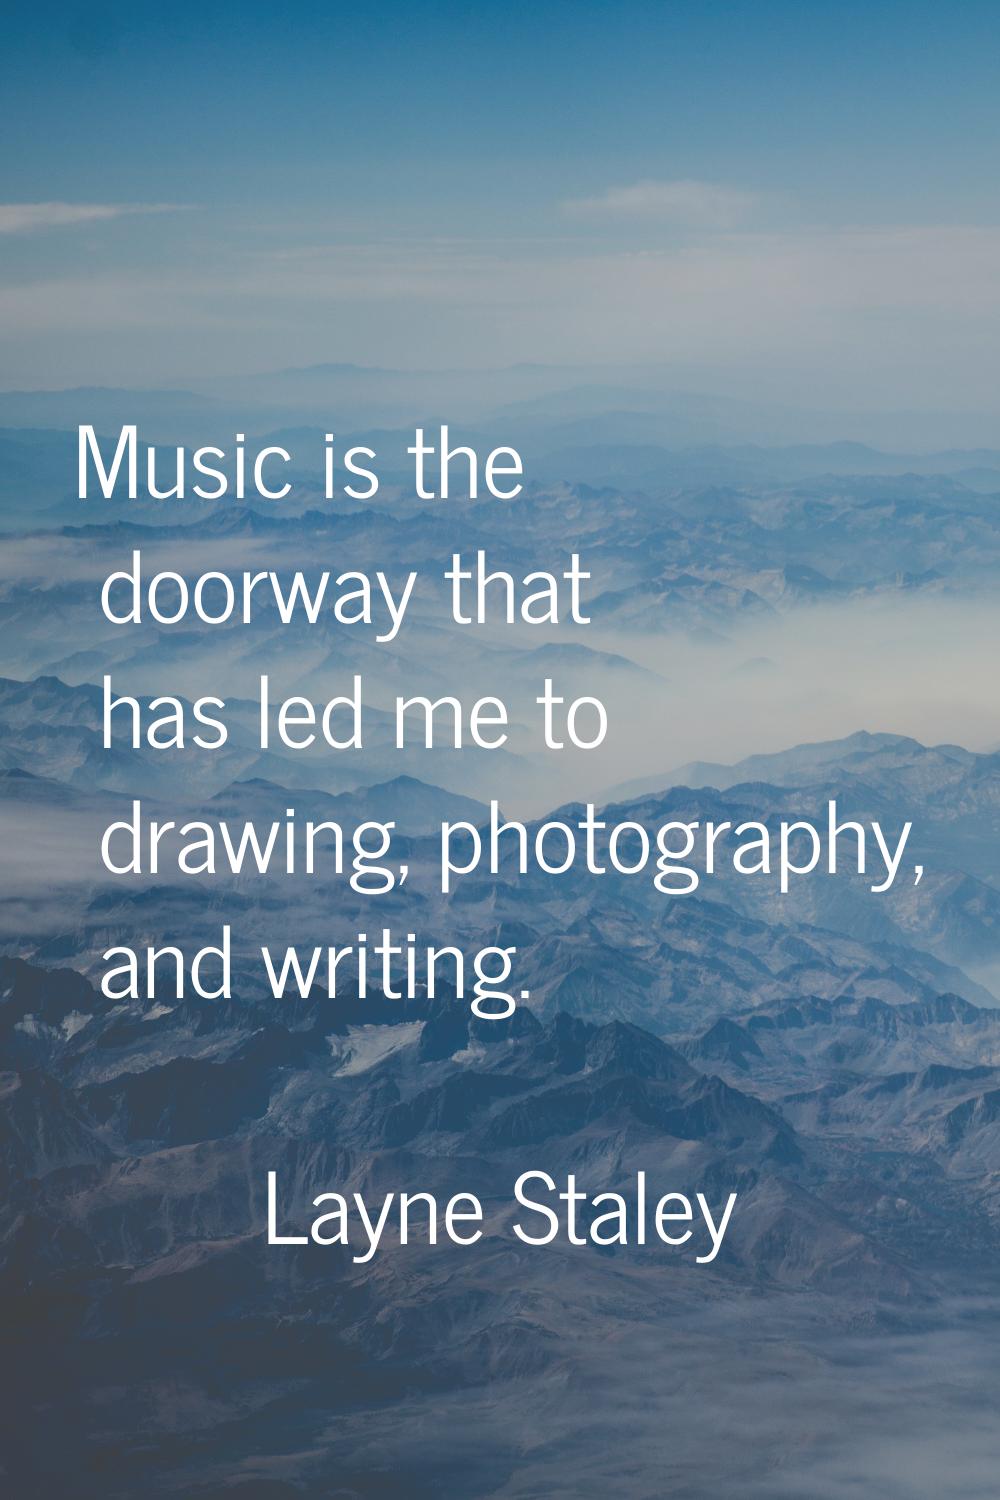 Music is the doorway that has led me to drawing, photography, and writing.